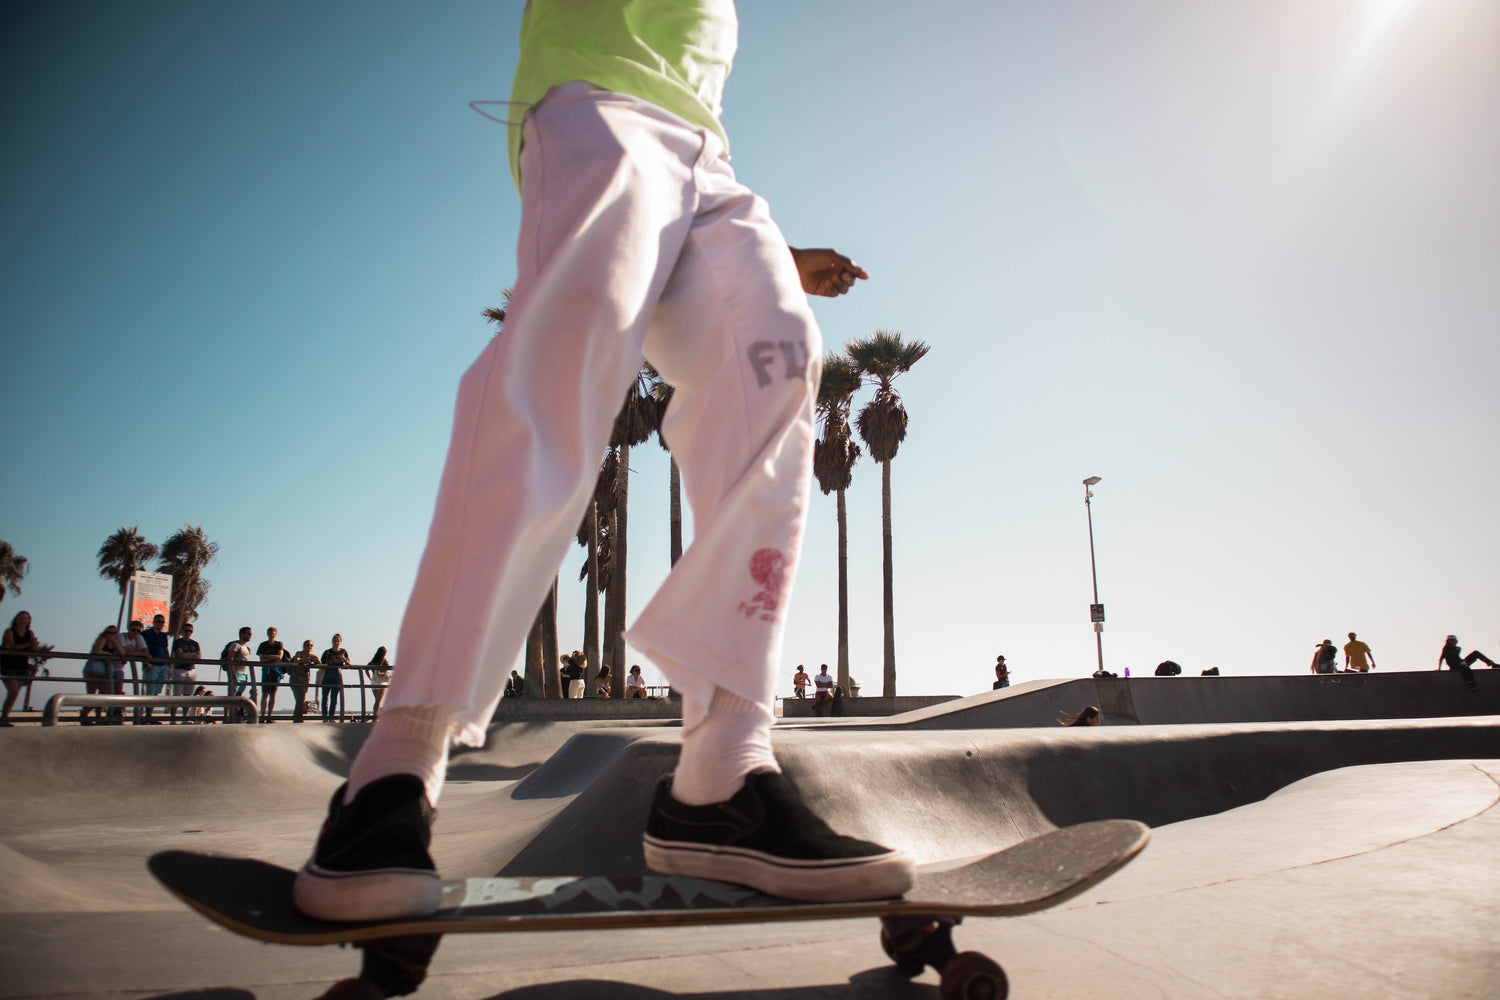 12 Reasons Why Your Skateboard Turns on Its Own